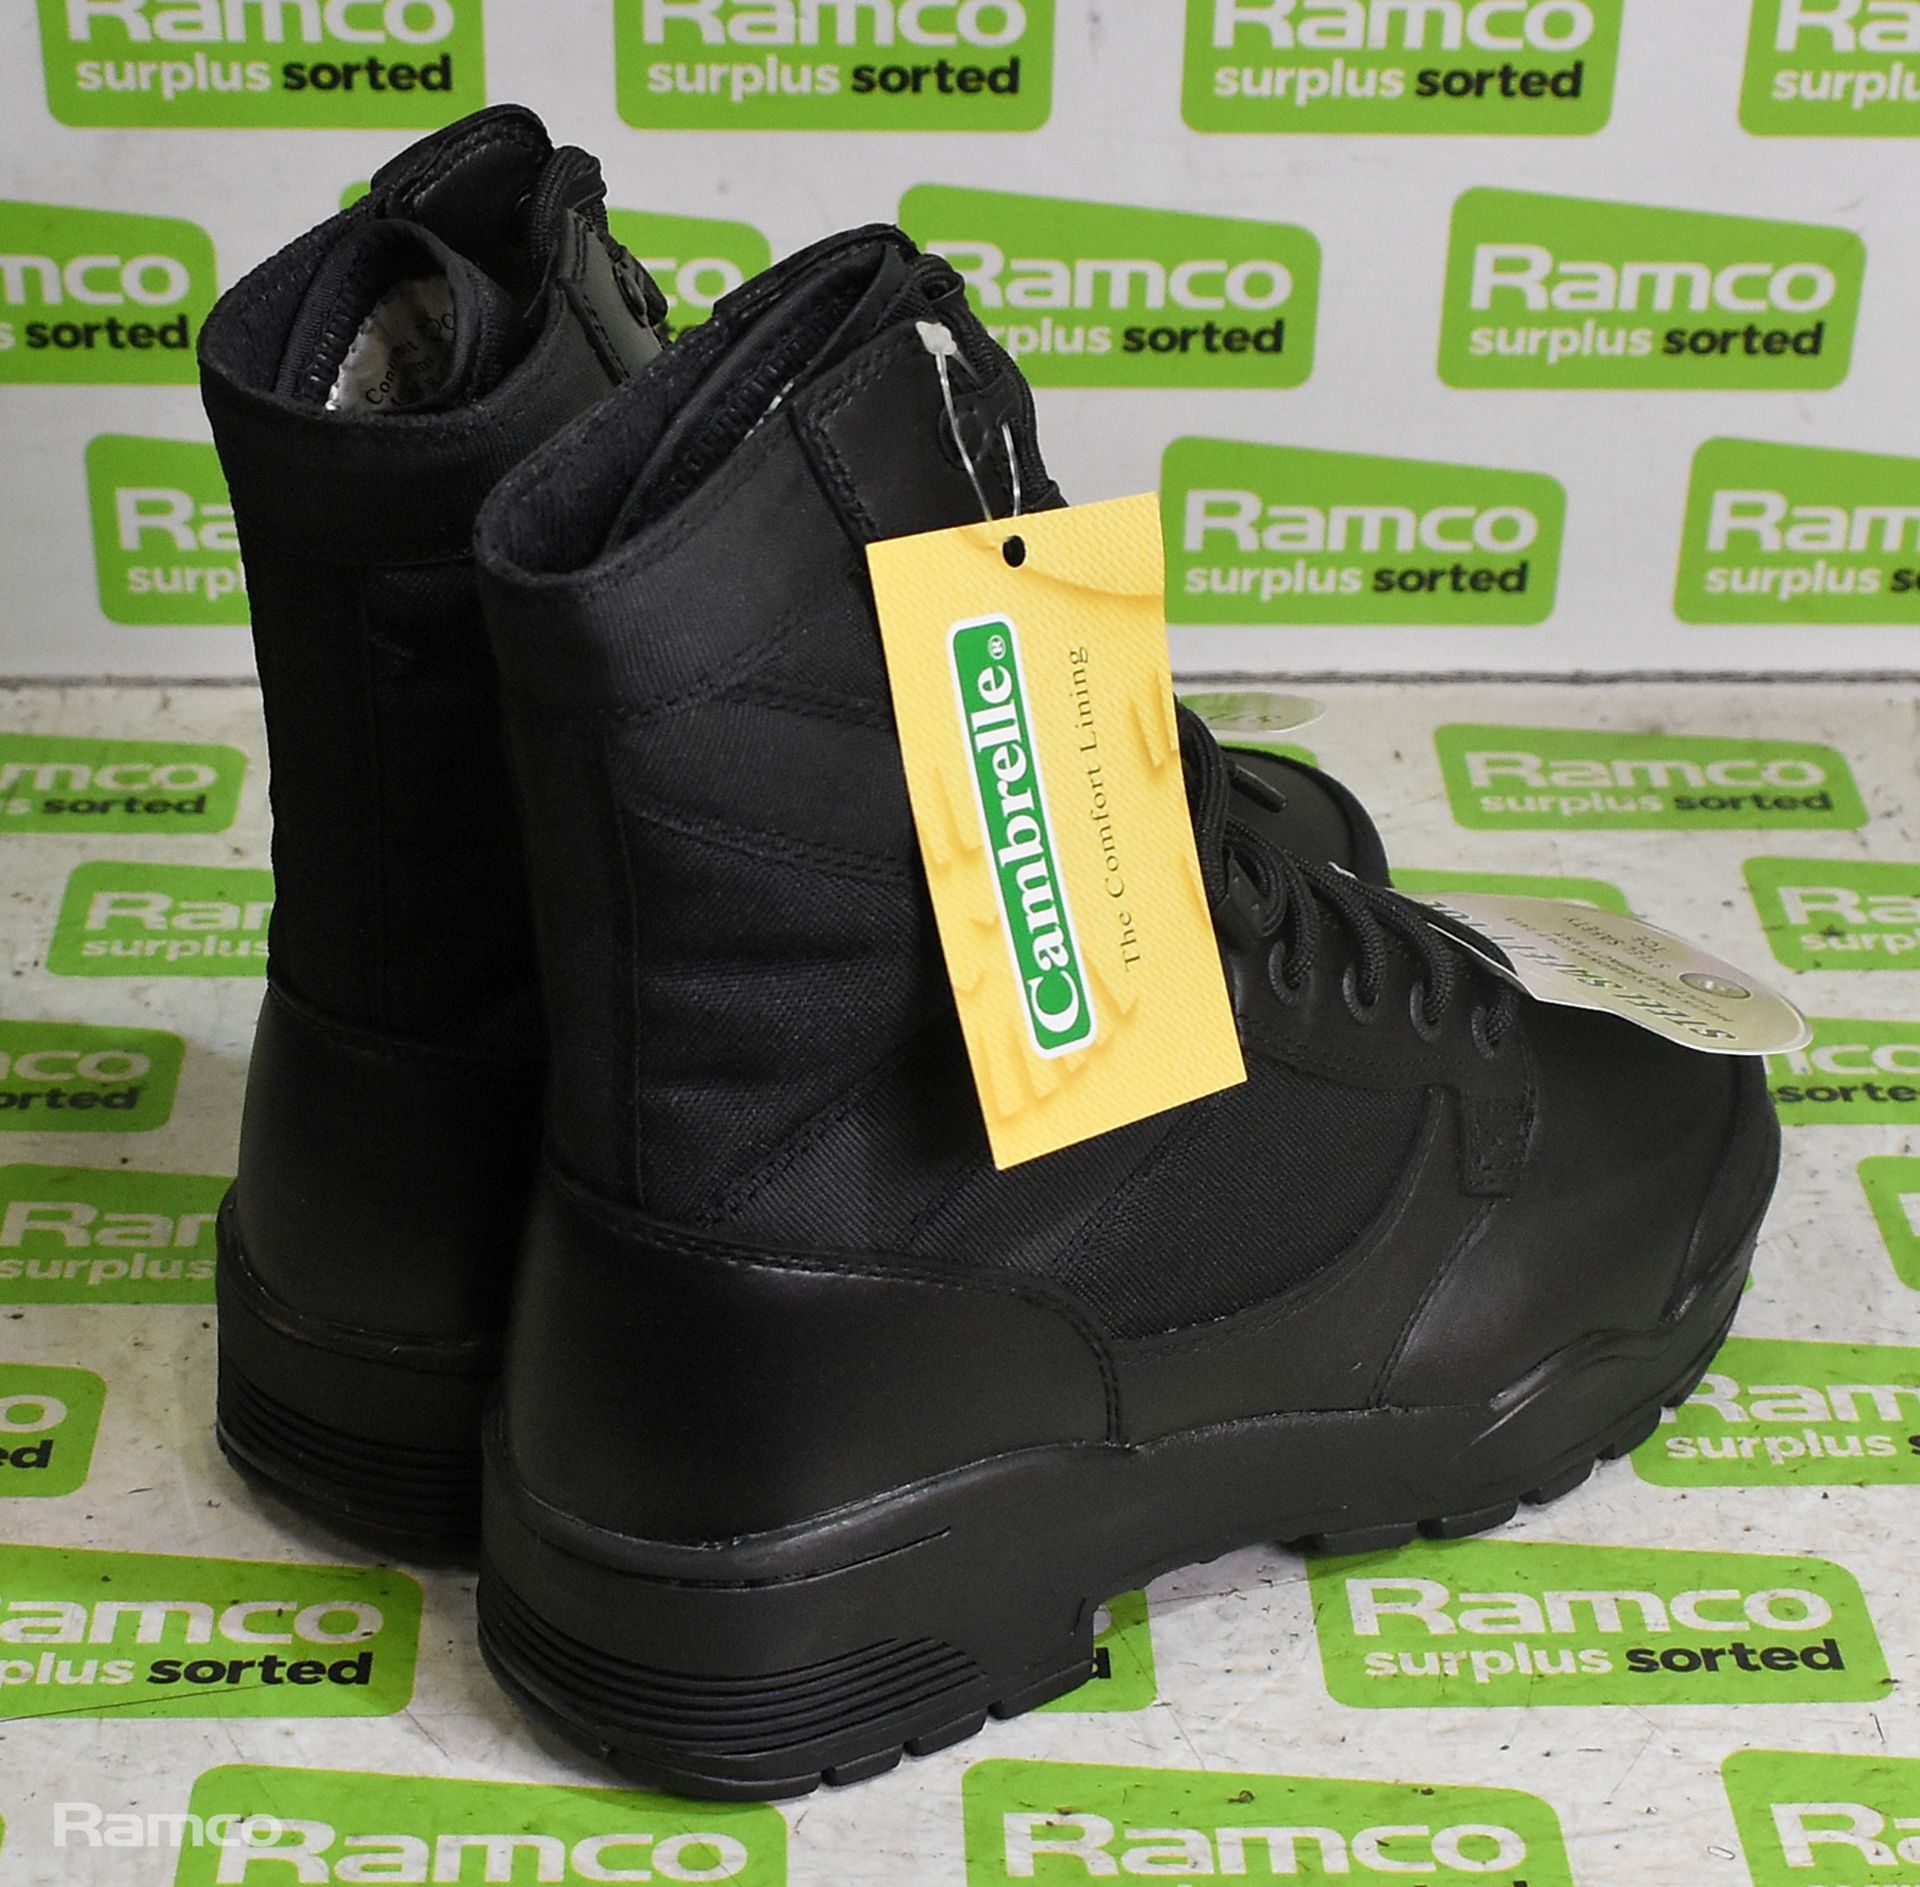 3x pairs of Magnum hot weather boots - Size 5L - Image 3 of 6